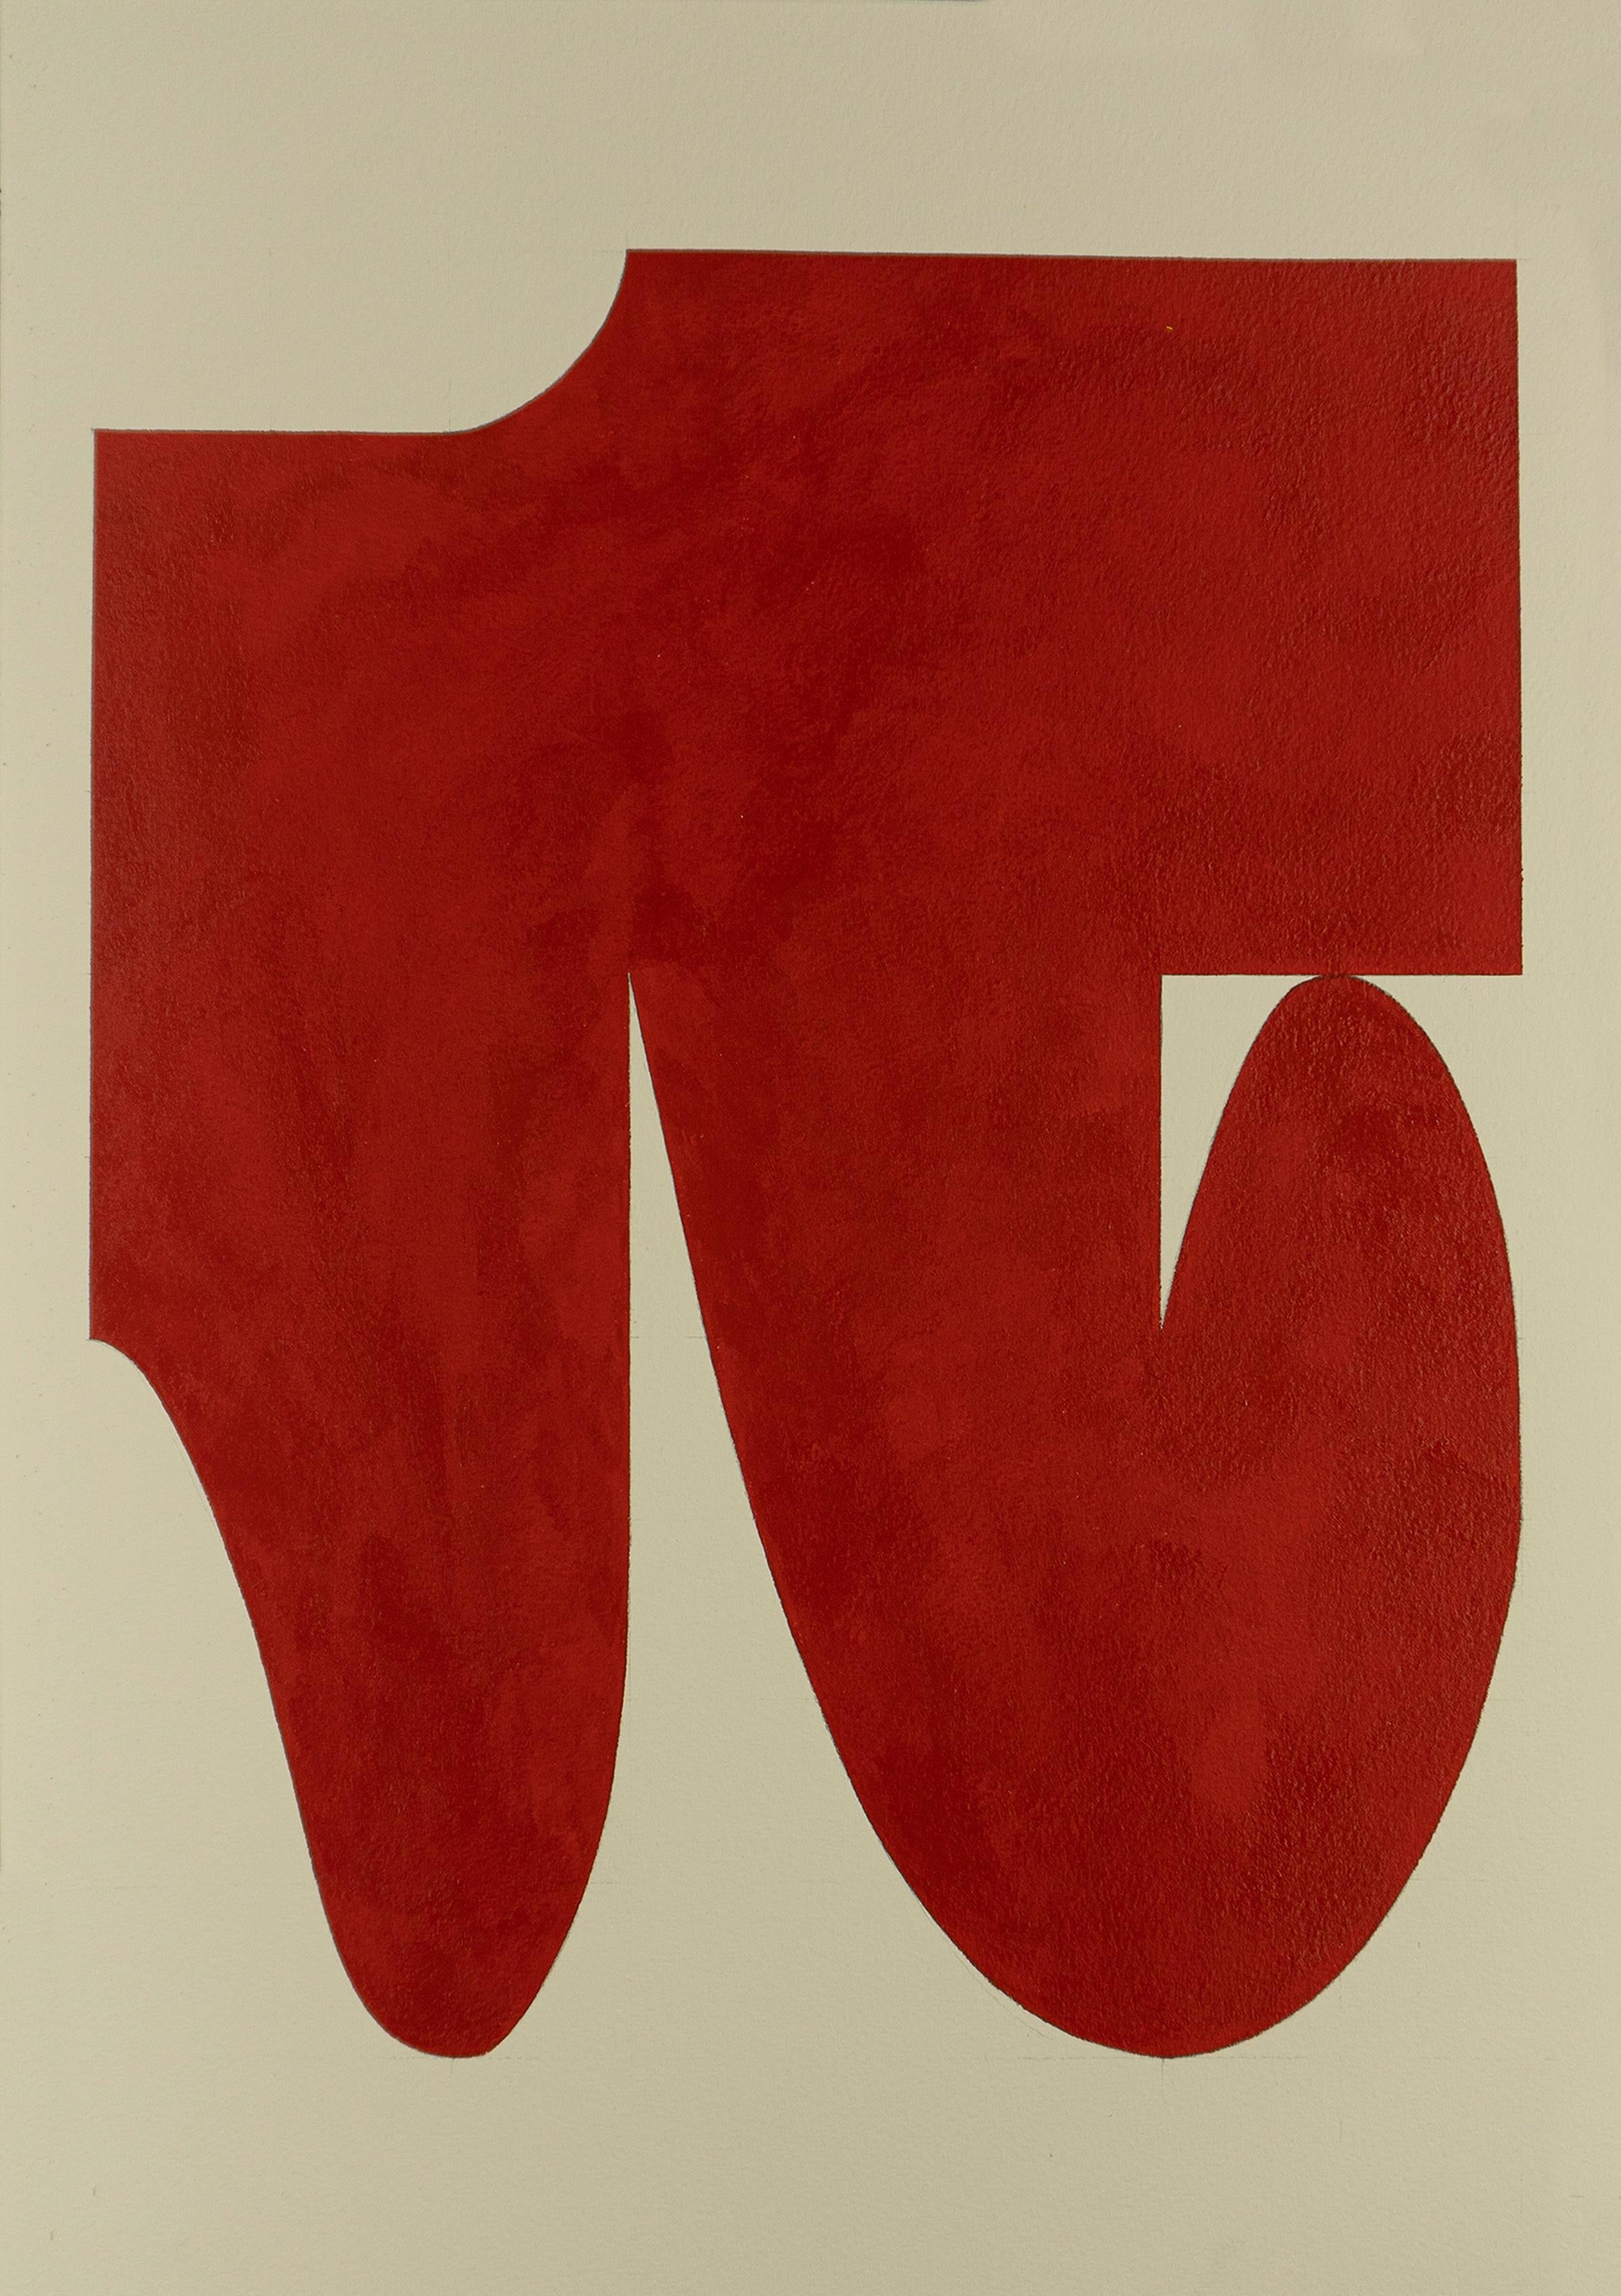 Ryan Park Abstract Painting - Shape 34 (2019) - Abstract shape, minimalist gestural work on paper, red & white